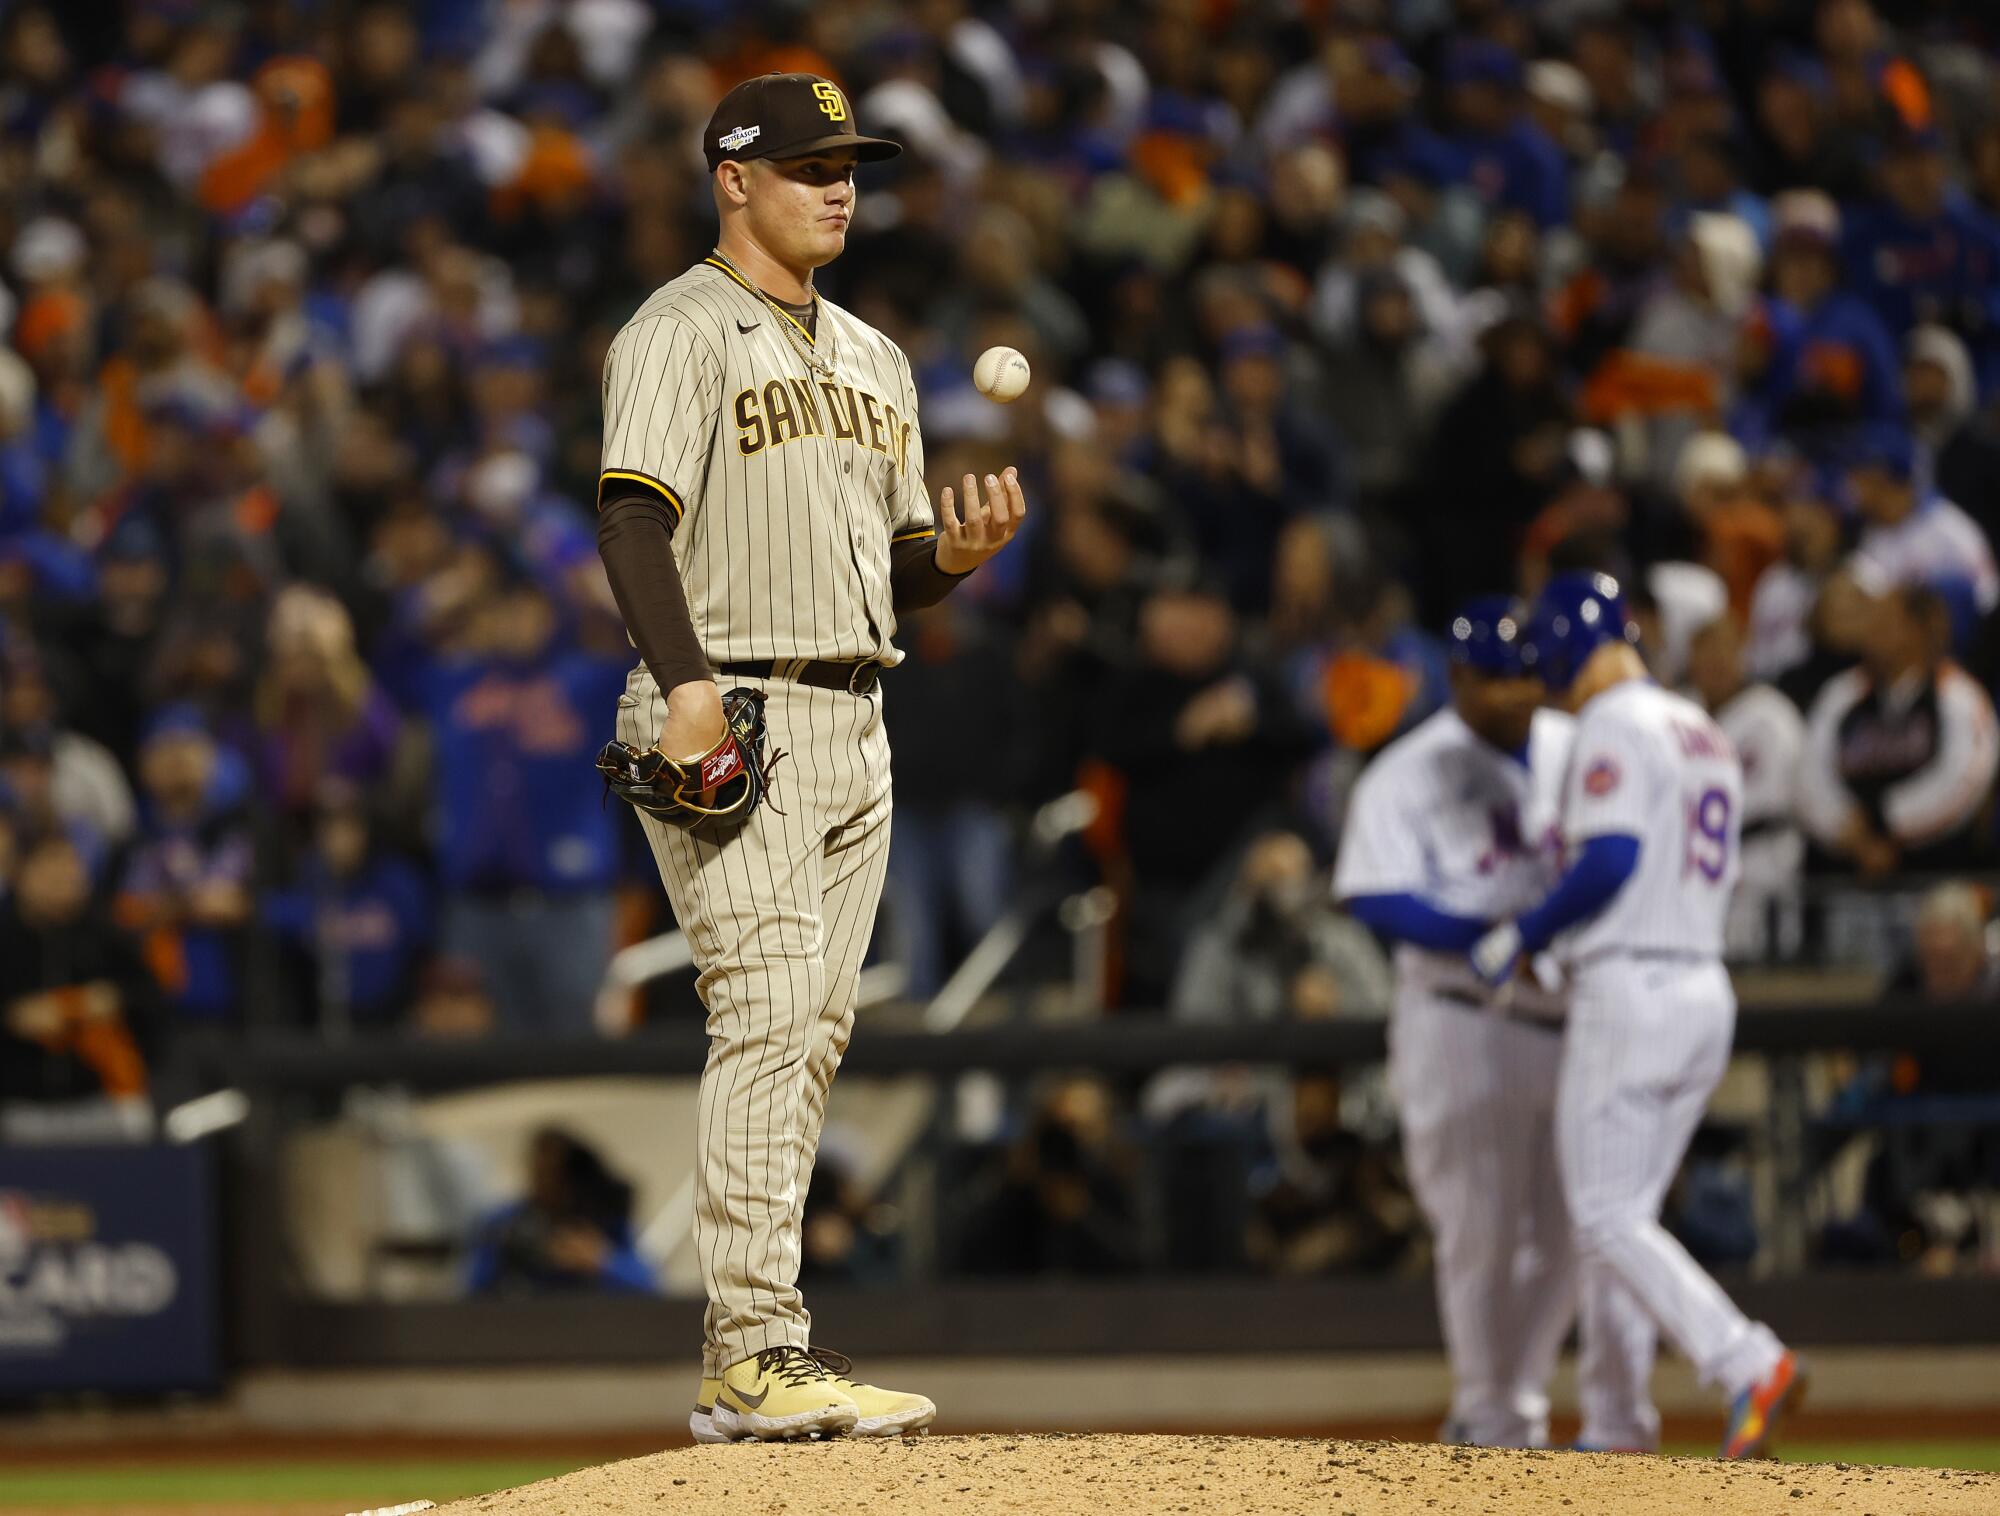 Padres pitcher Adrian Morejon stands on the mound after walking the Mets' Mark Canha to load the bases in the seventh inning.